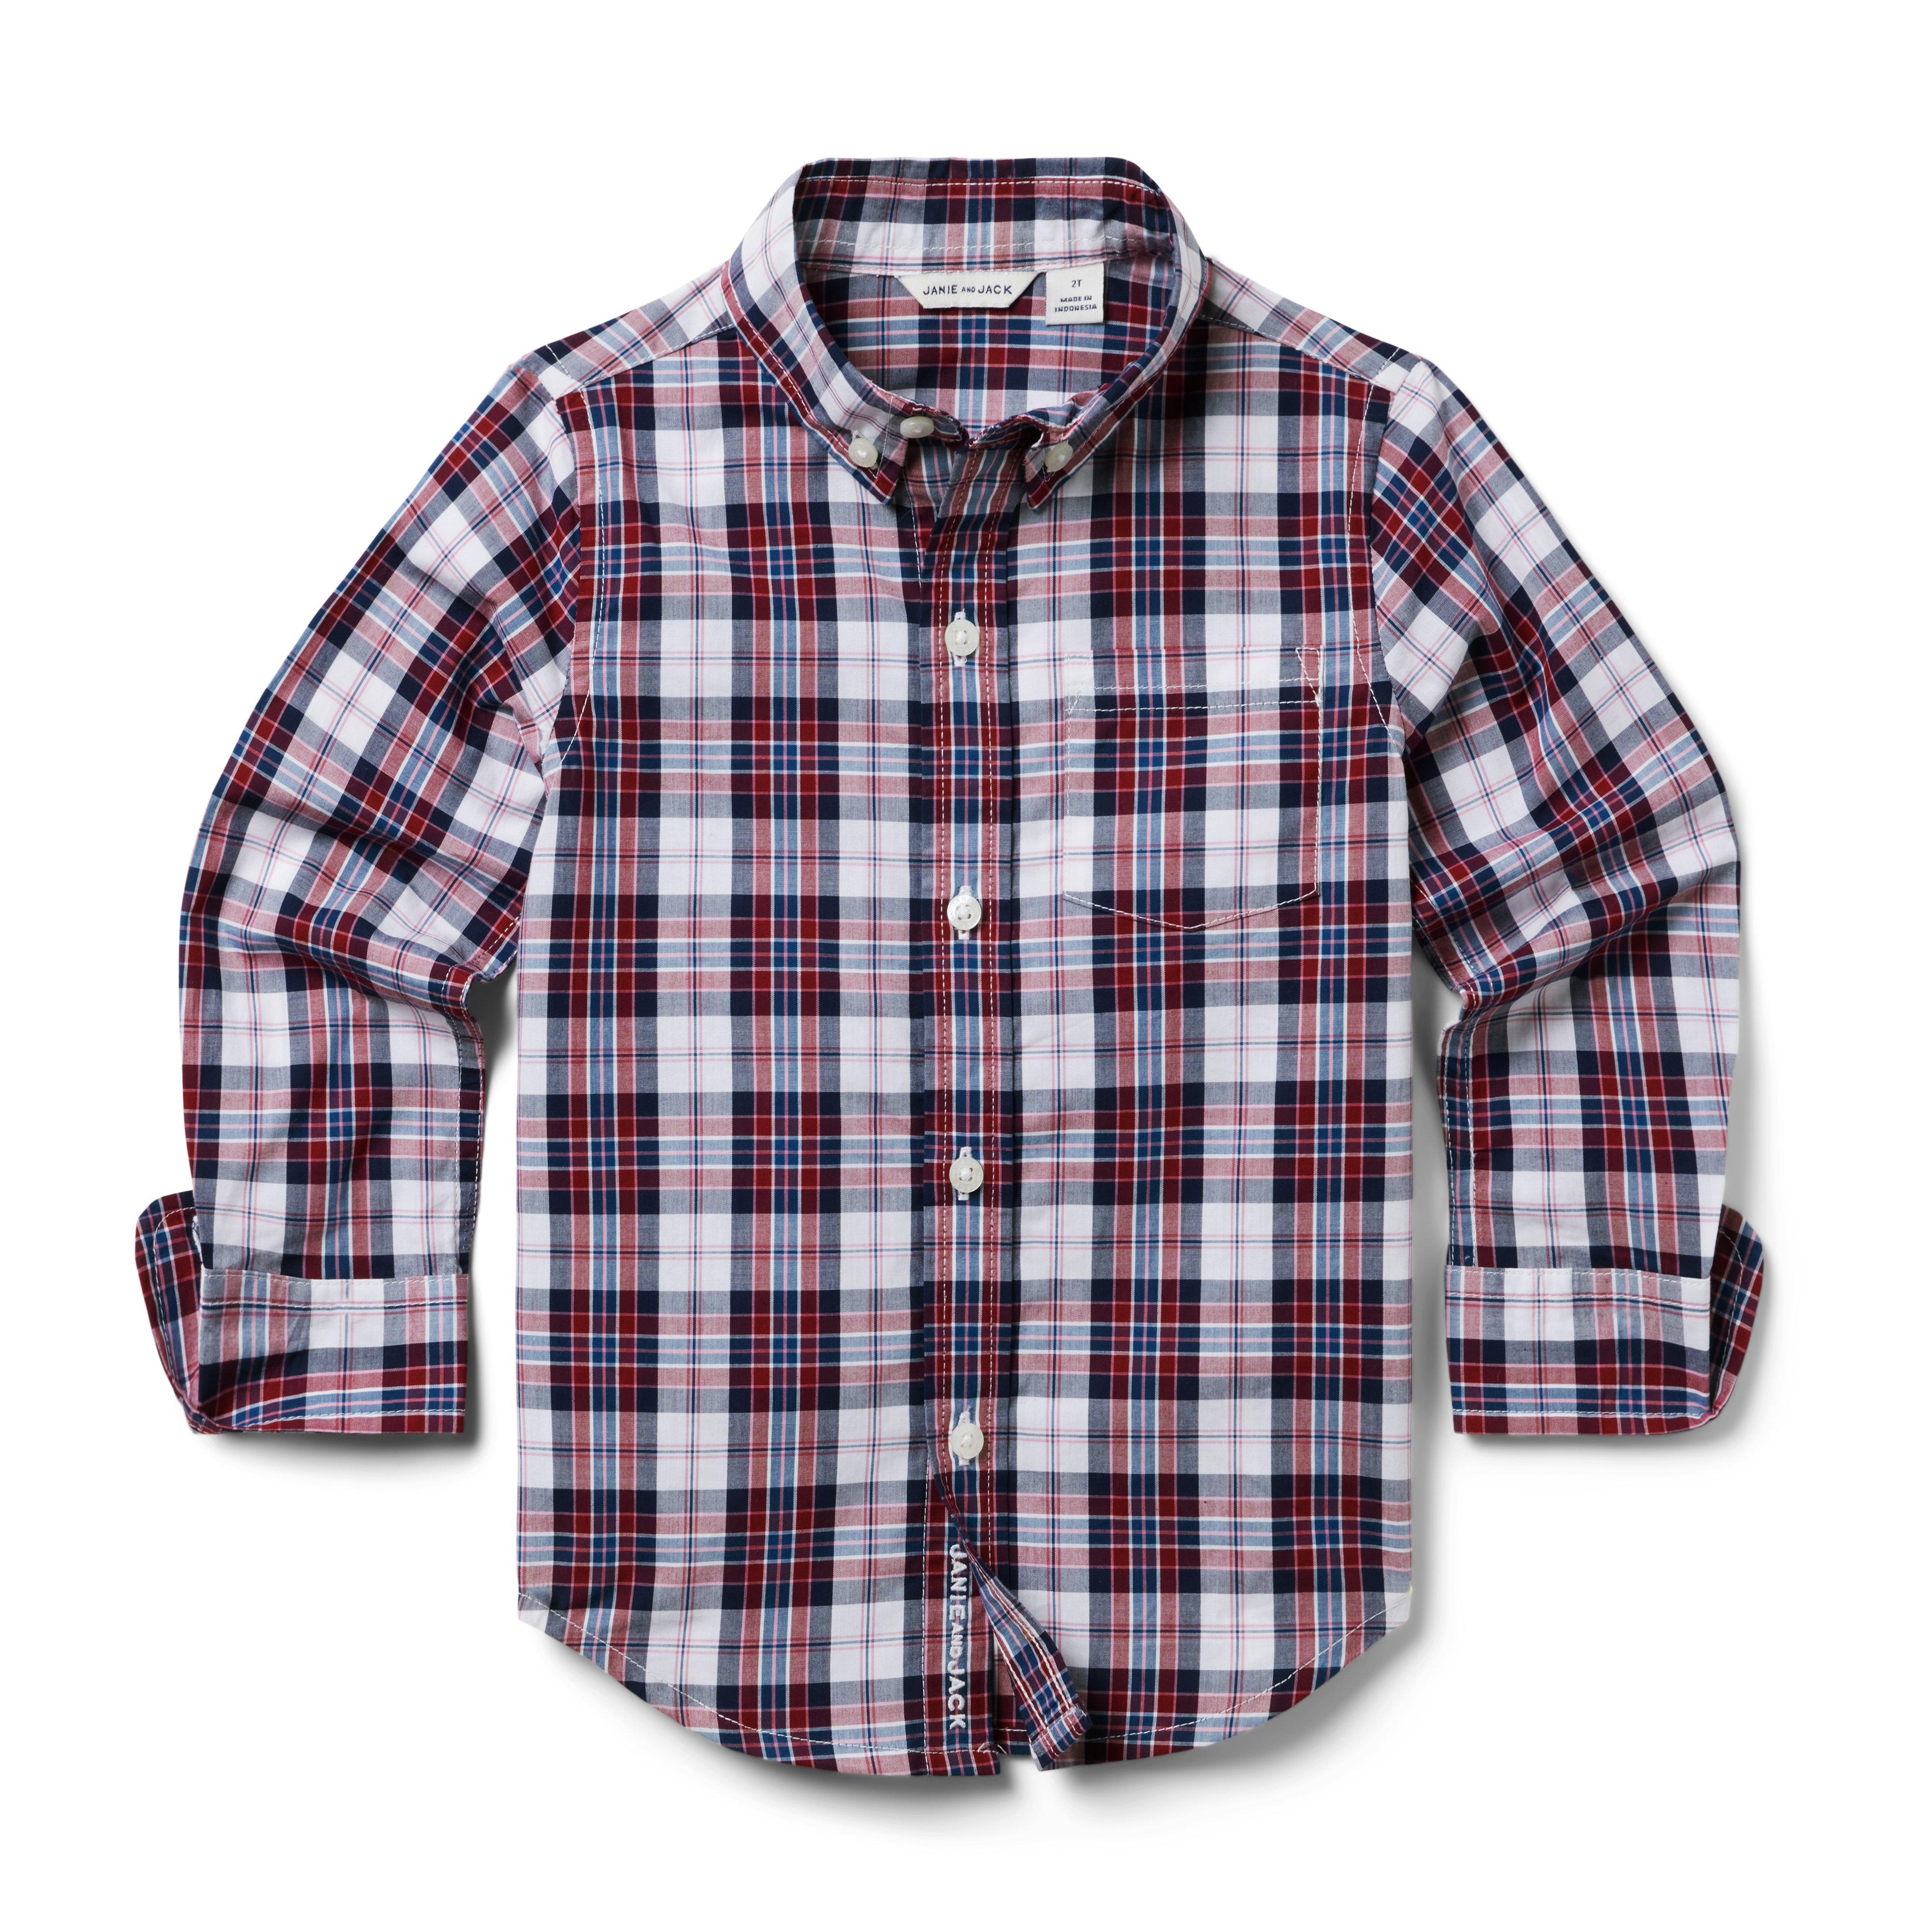 Boys Button-Up Shirts at Janie and Jack